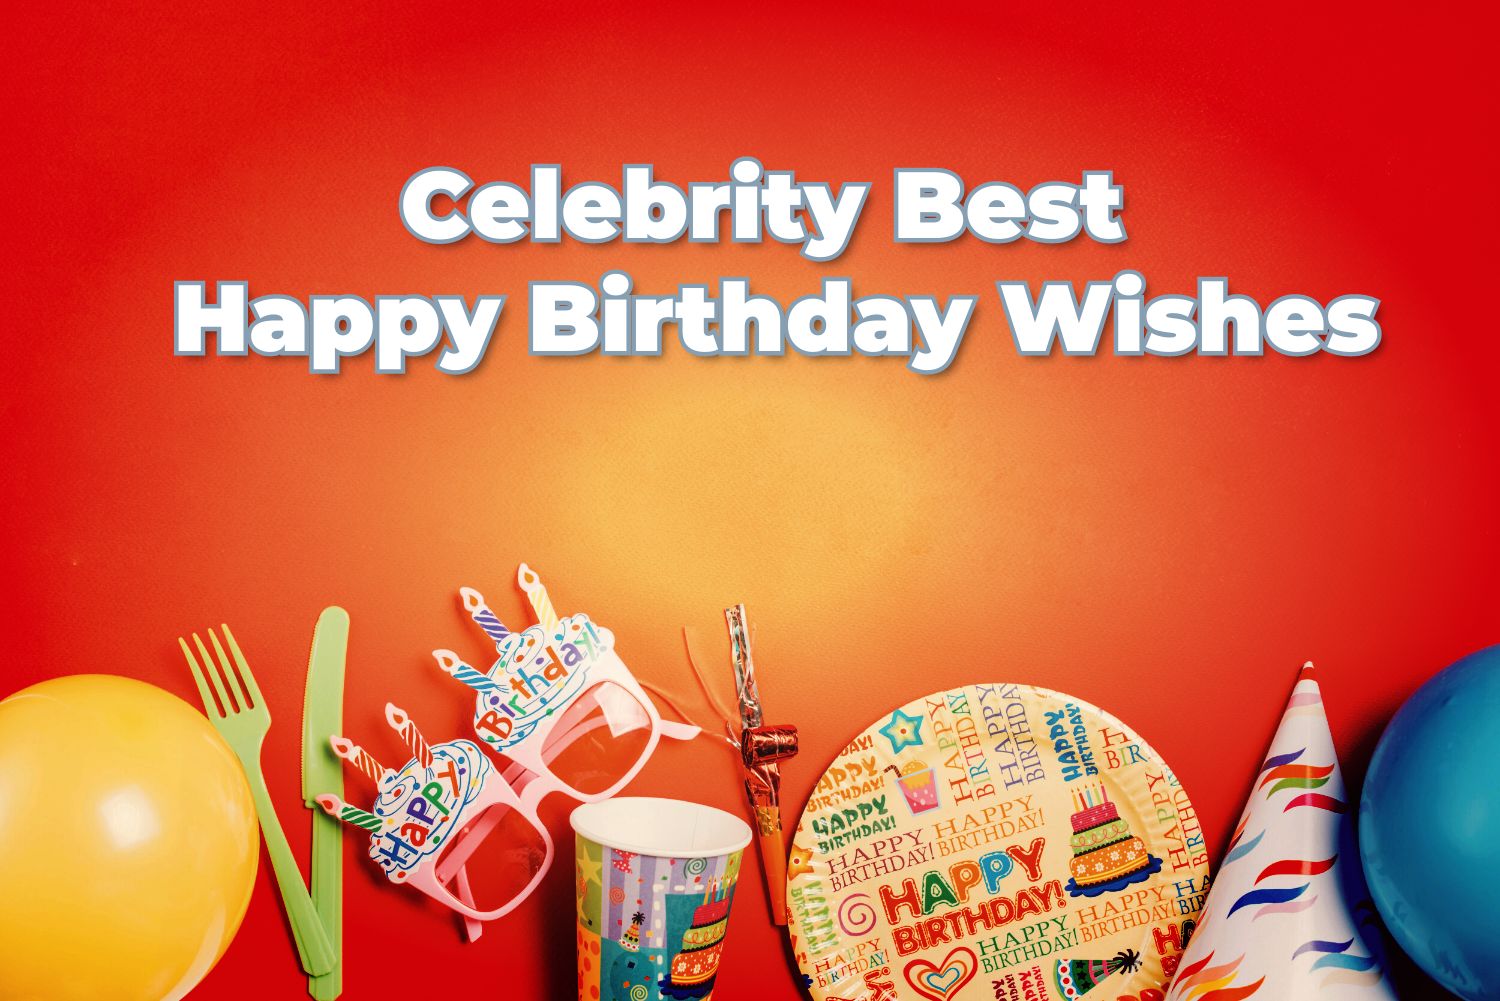 50+ Male/Female Celebrity Best Birthday Wishes and Messages